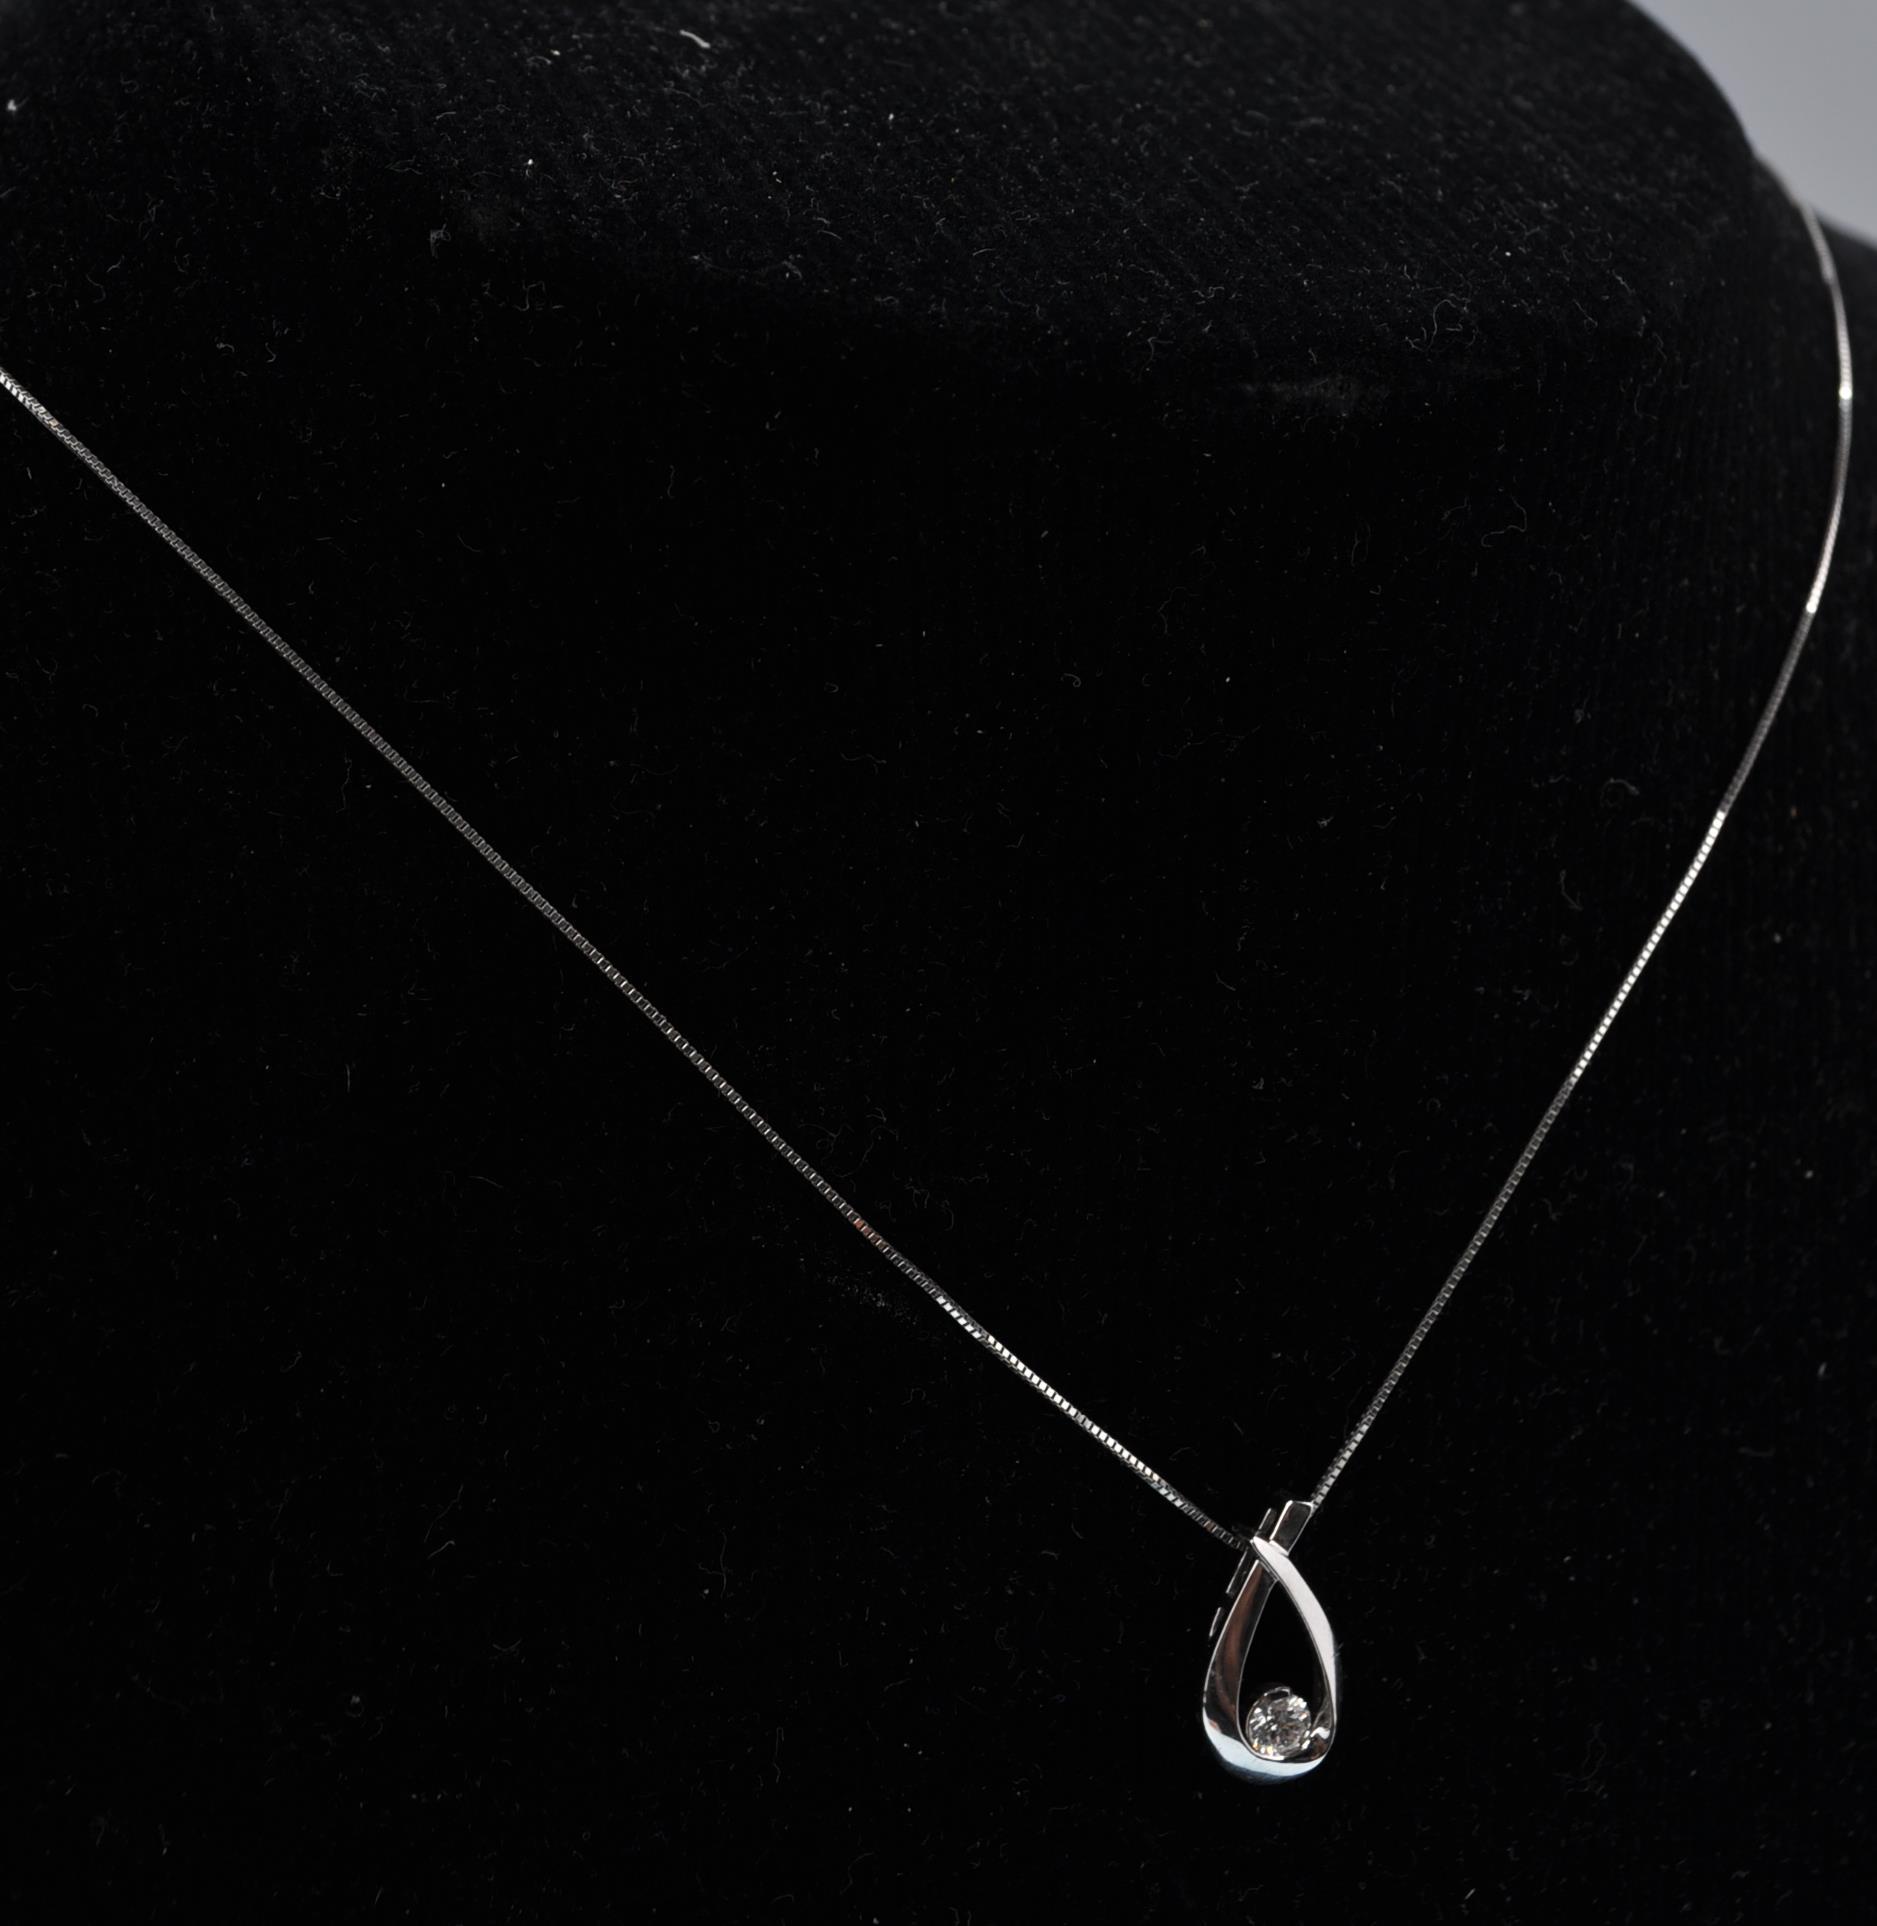 A 10ct white gold and diamond necklace and pendant - Image 3 of 6